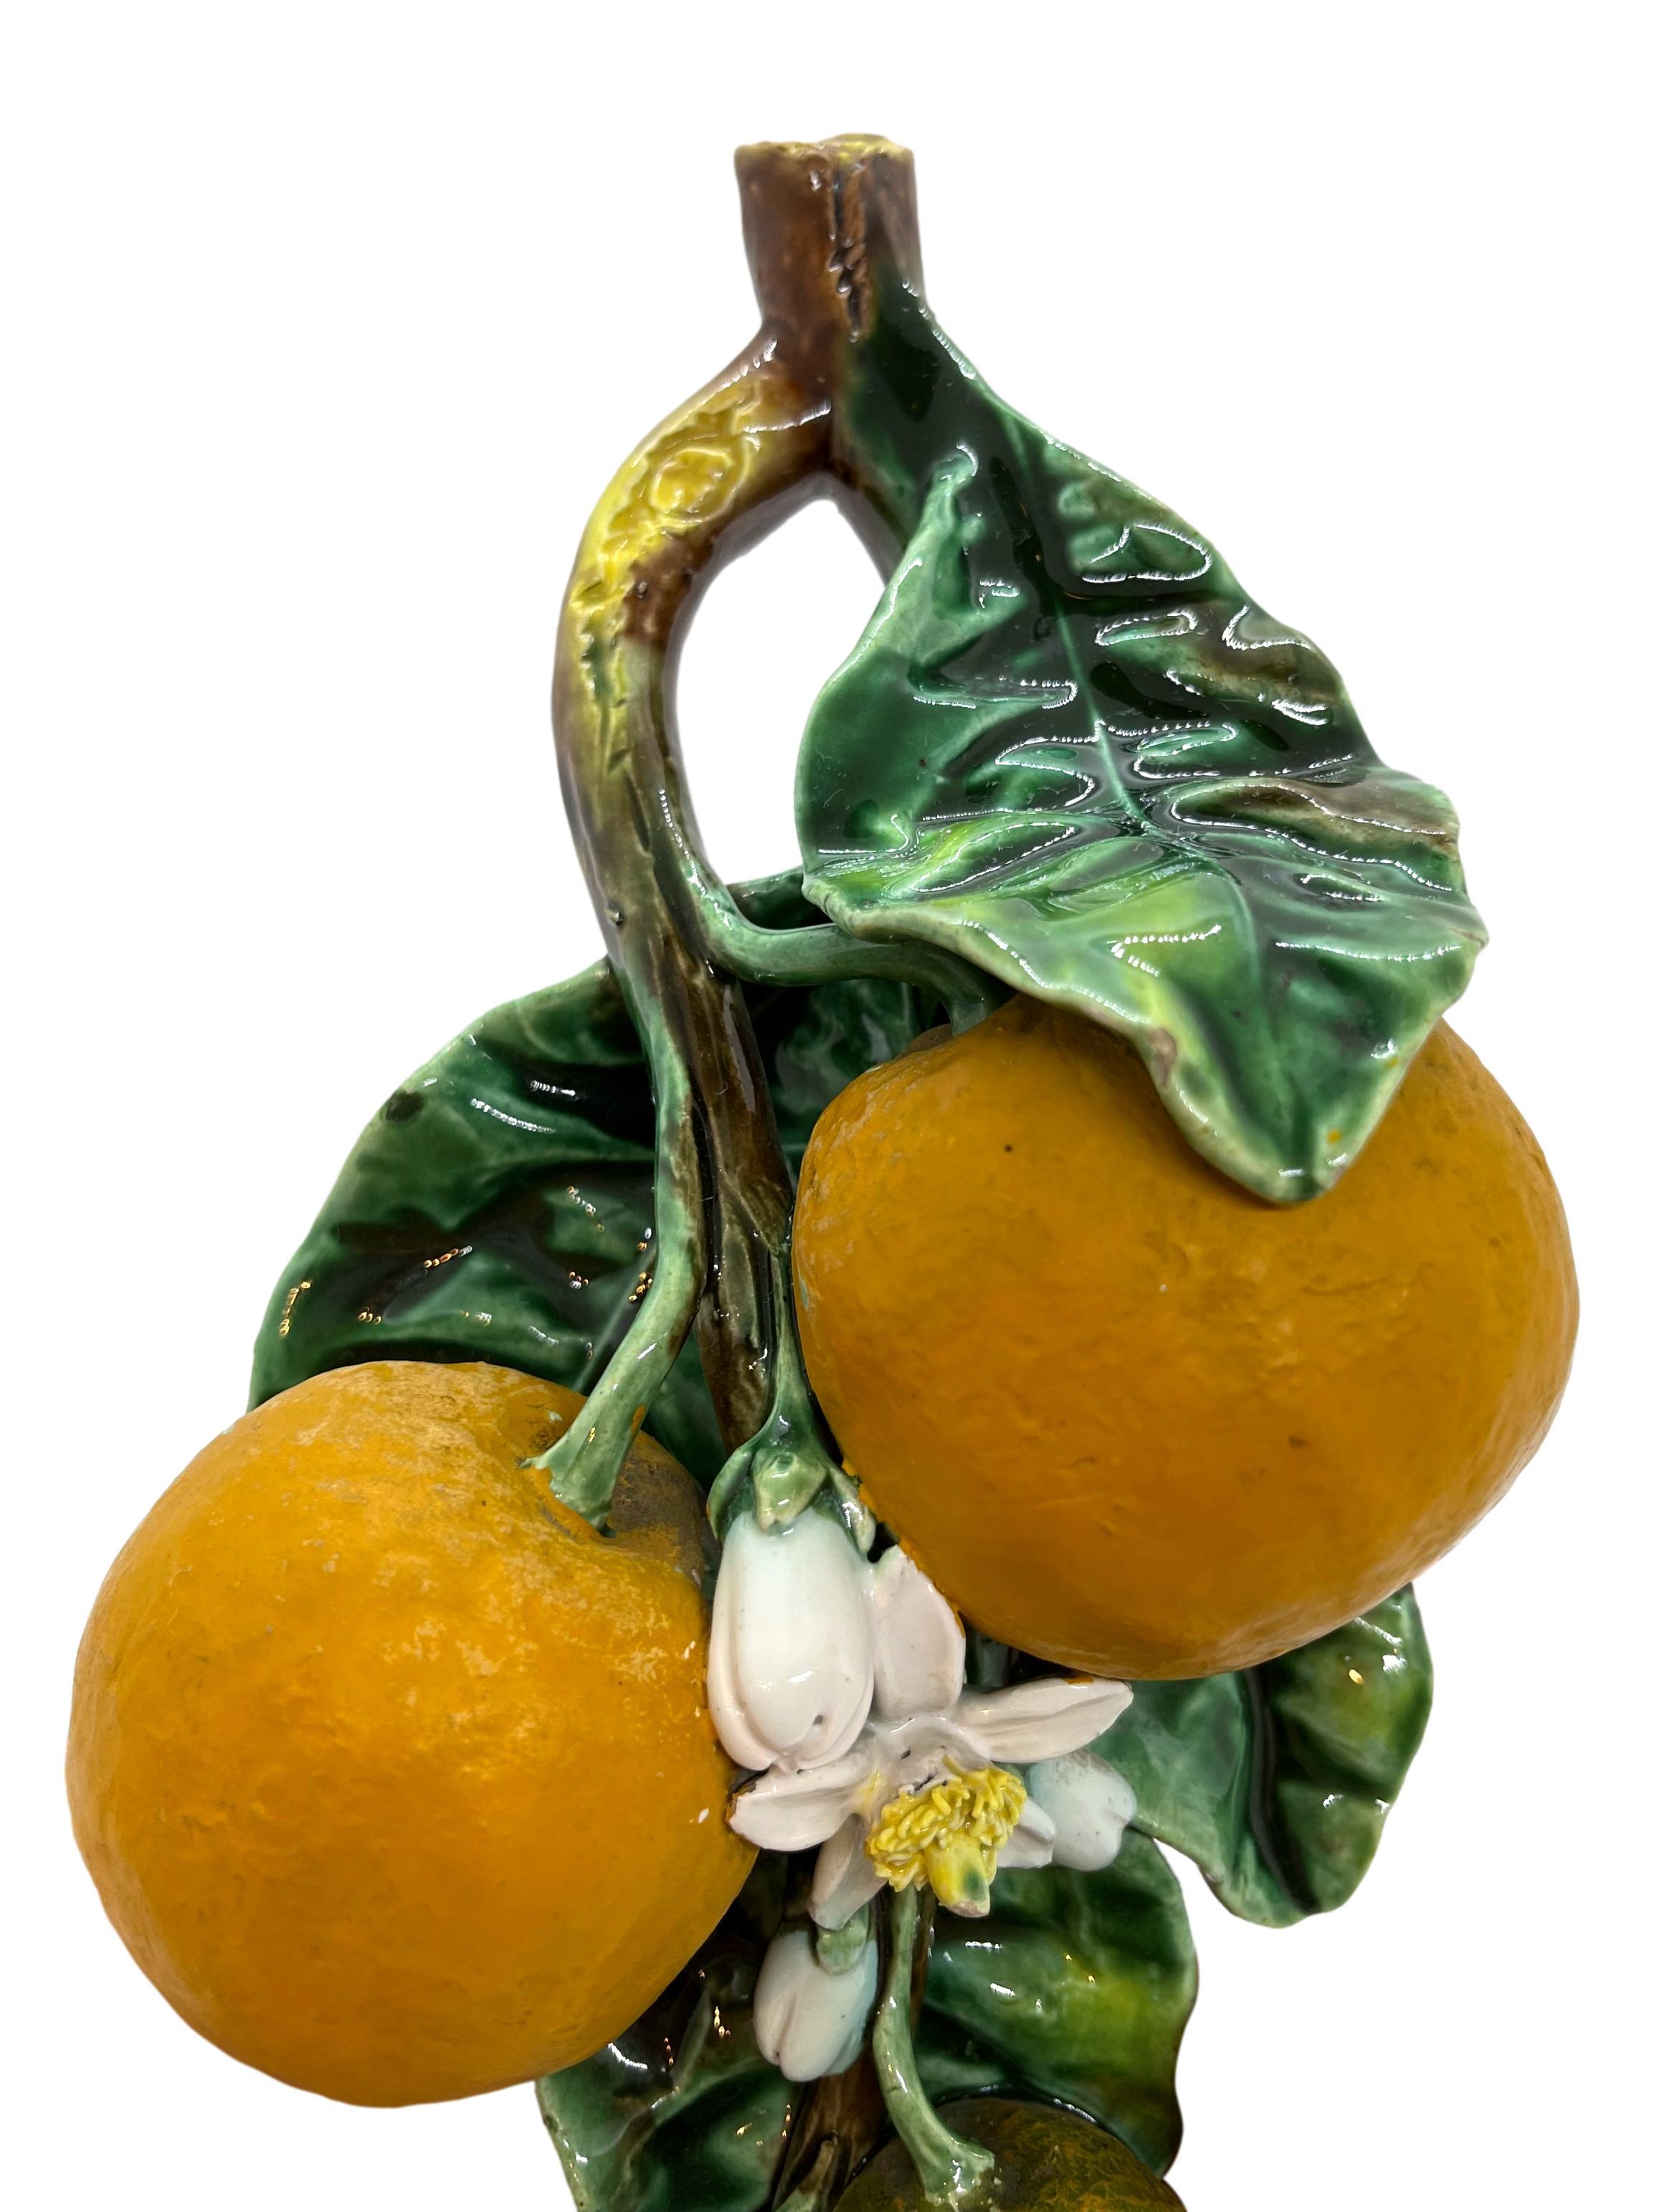 Large Majolica Trompe L'oeil Wall Plaque with Oranges by Perret-Gentil, Menton In Good Condition For Sale In Banner Elk, NC